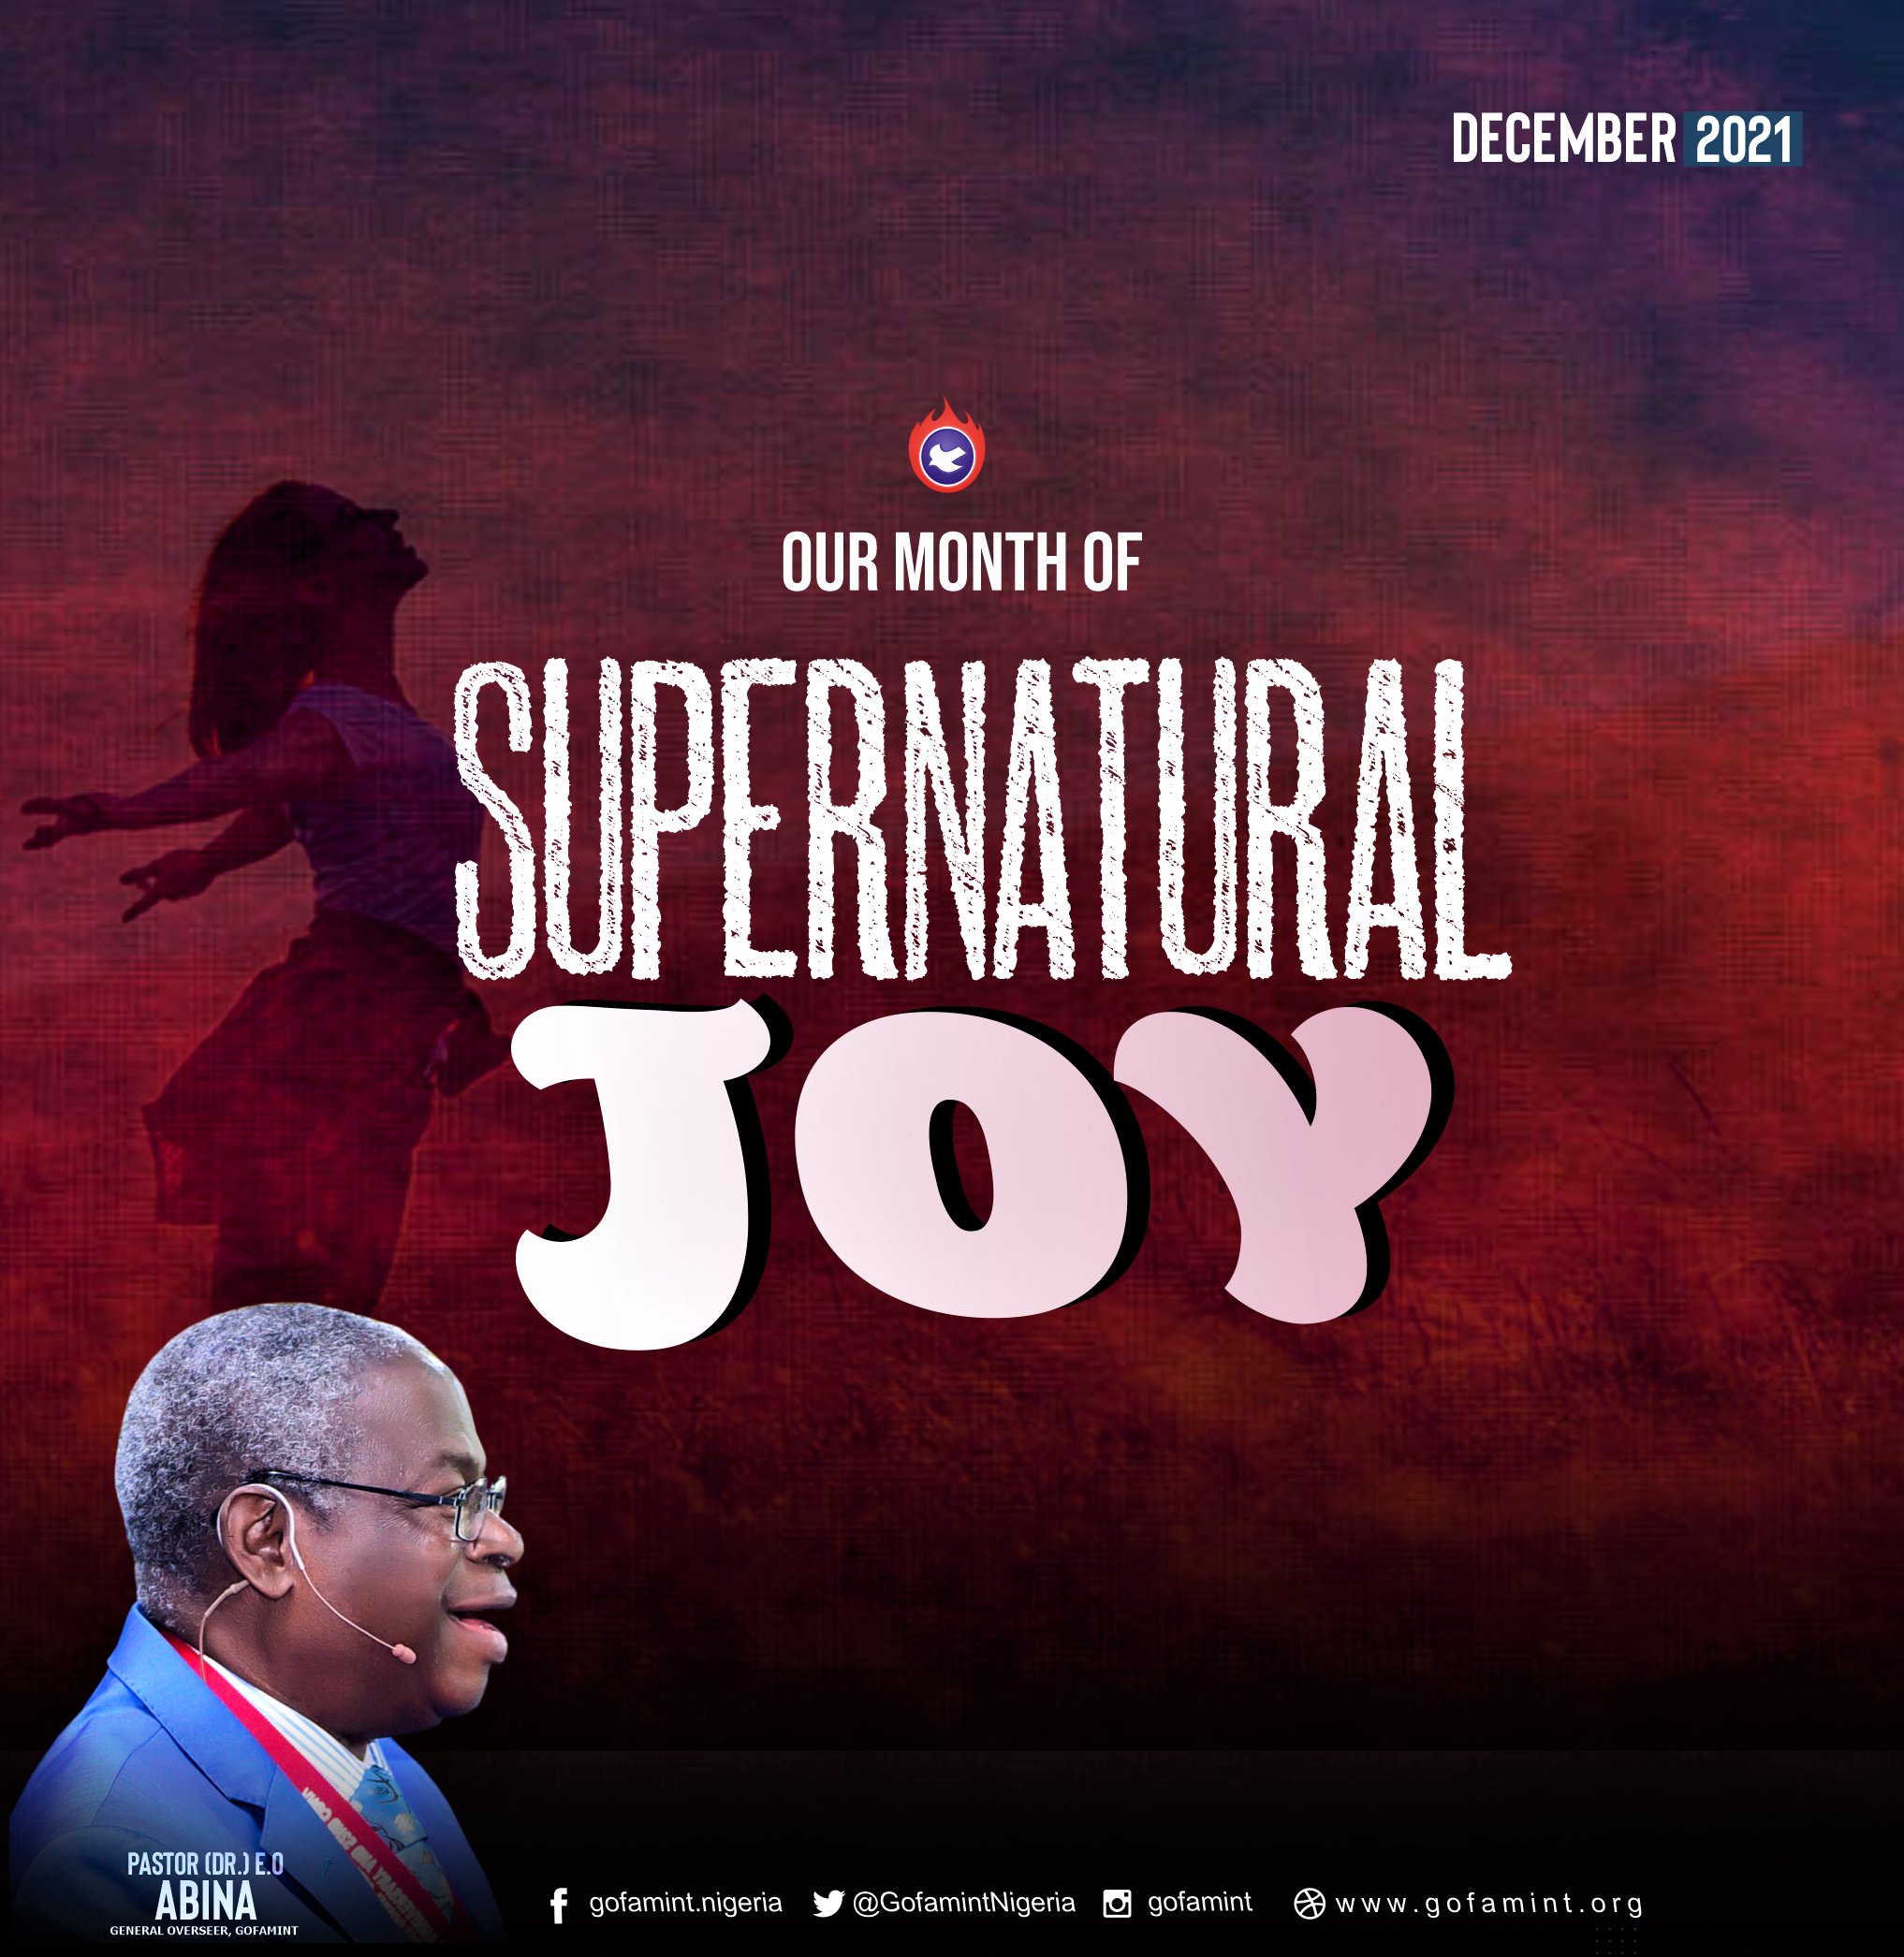 WELCOME TO DECEMBER 2021 –  OUR MONTH OF SUPERNATURAL JOY